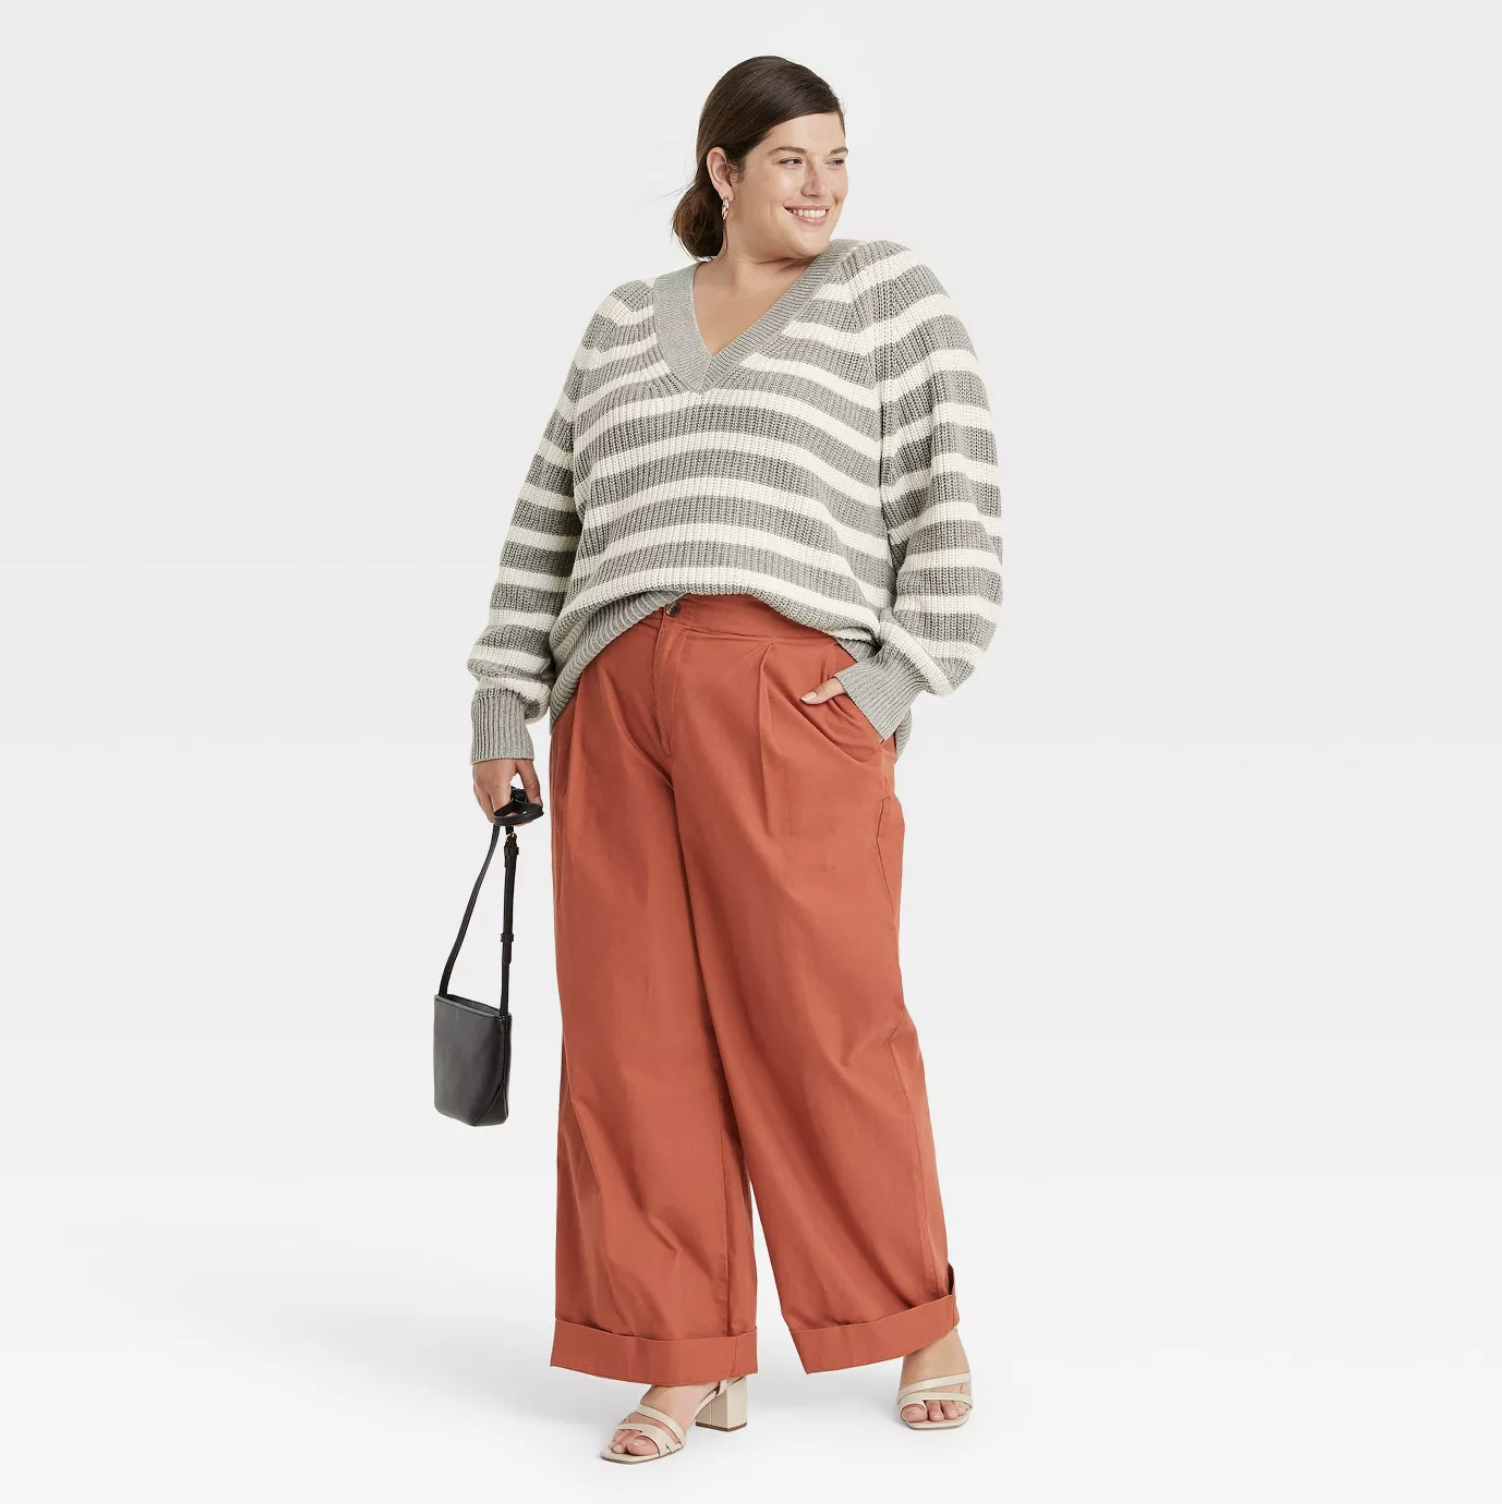 model wearing striped pullover with orange pants